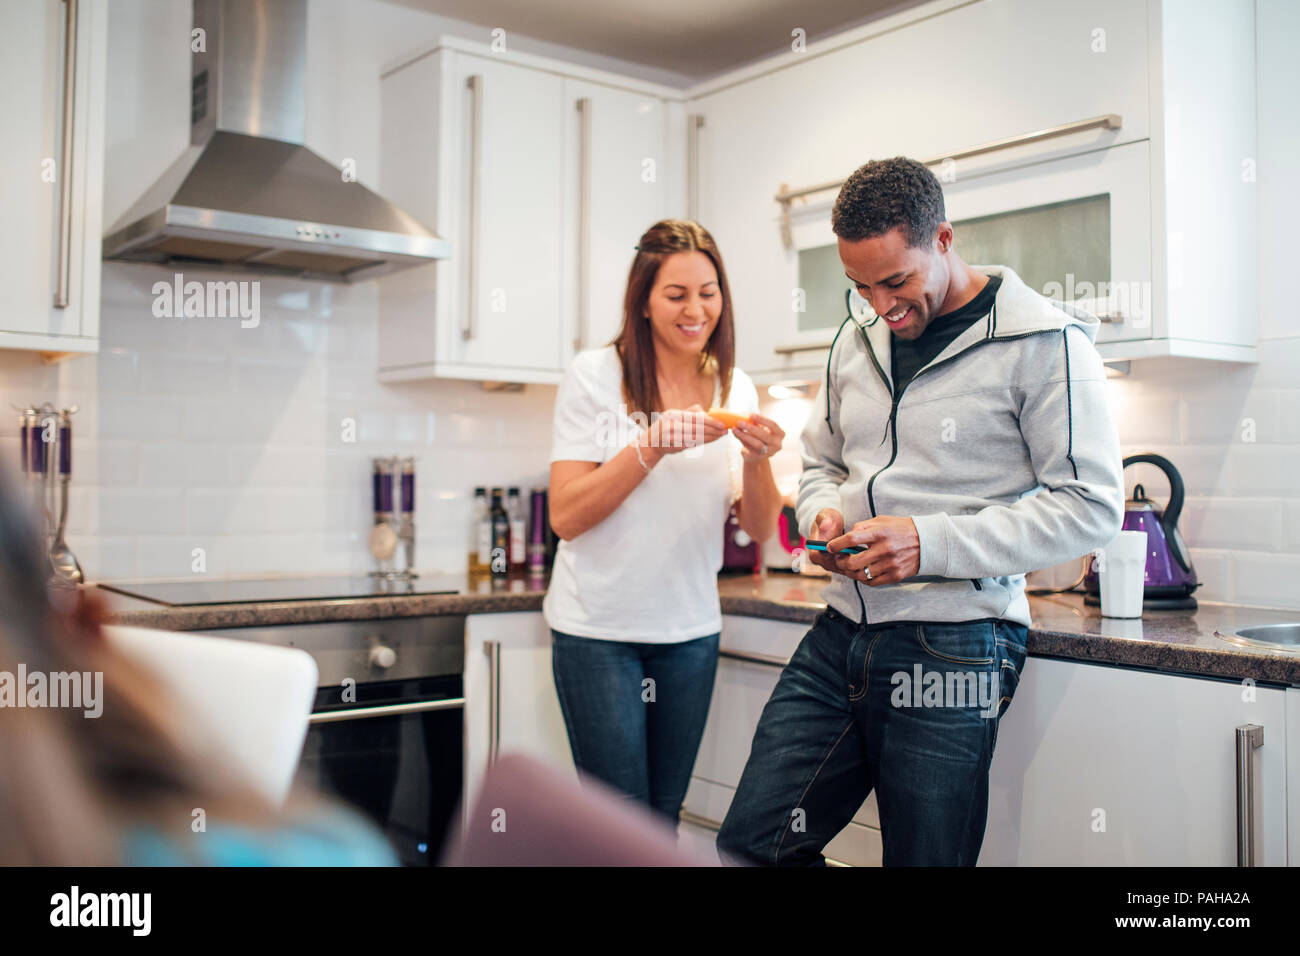 Mid adult couple are relaxing in the kitchen of their home together. The woman is eating a slice of orange and the man is using his smart phone. Stock Photo